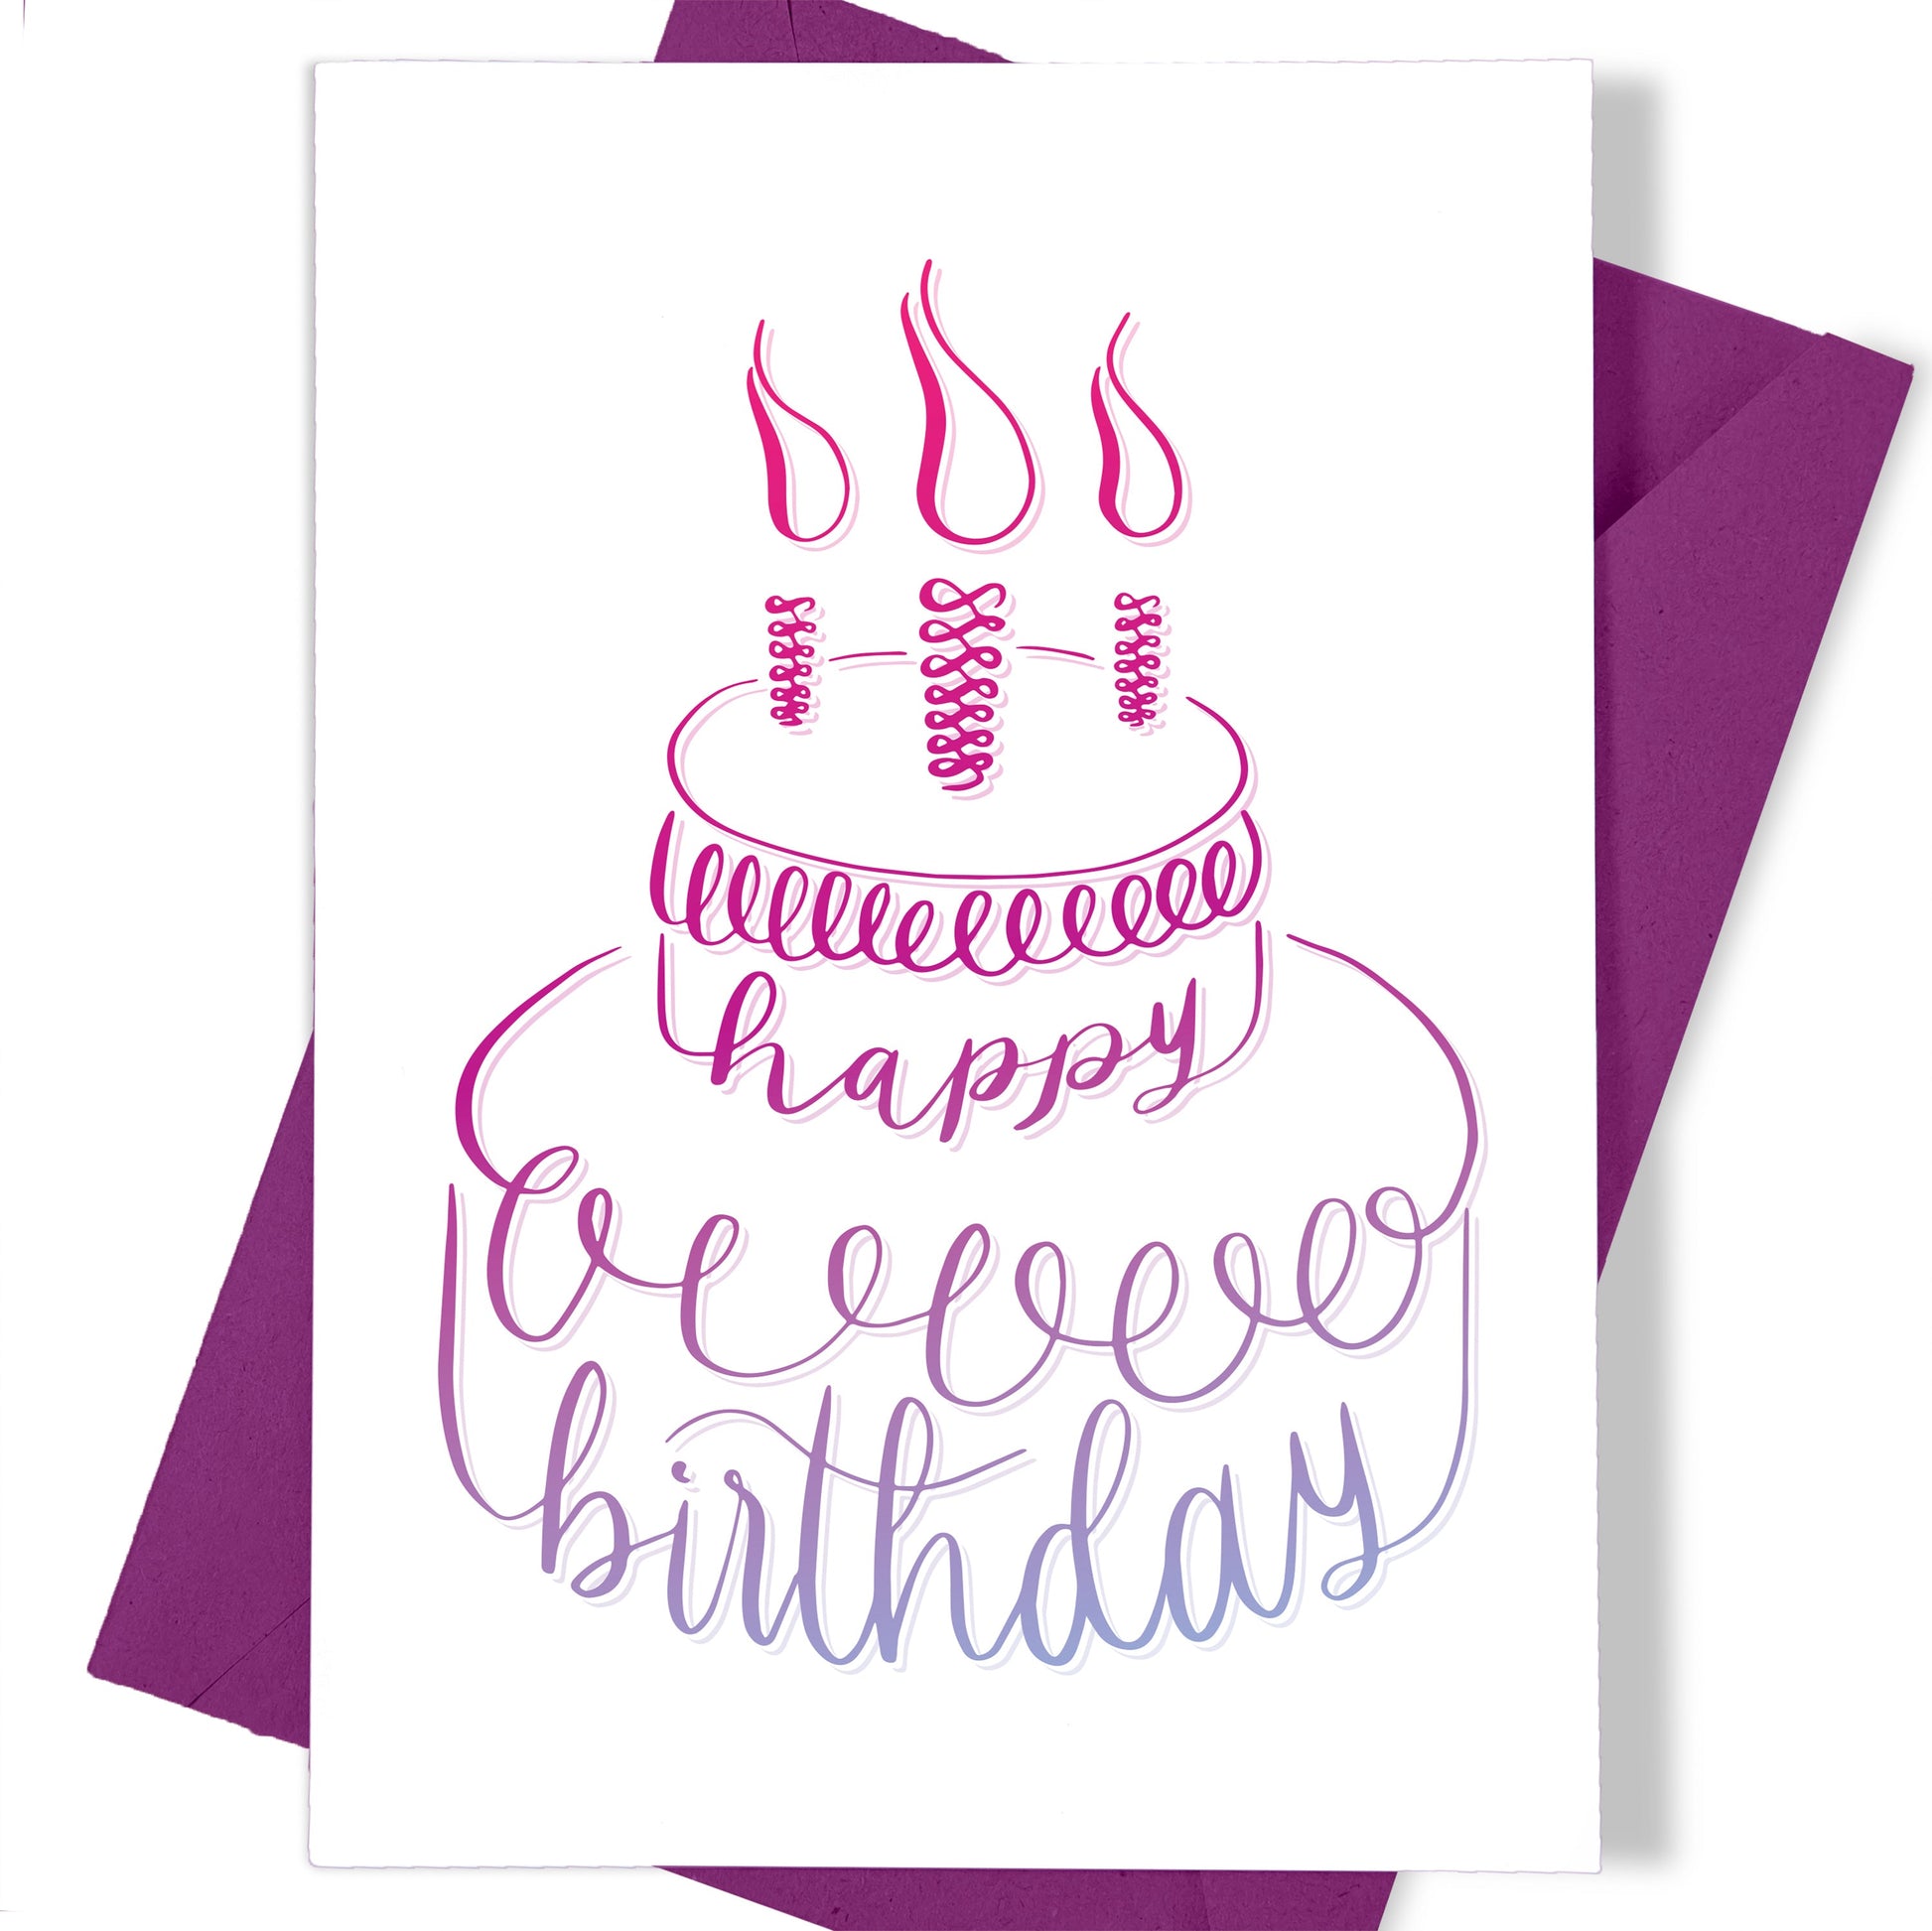 A thumbnail view of the greeting card: "Happy Birthday"